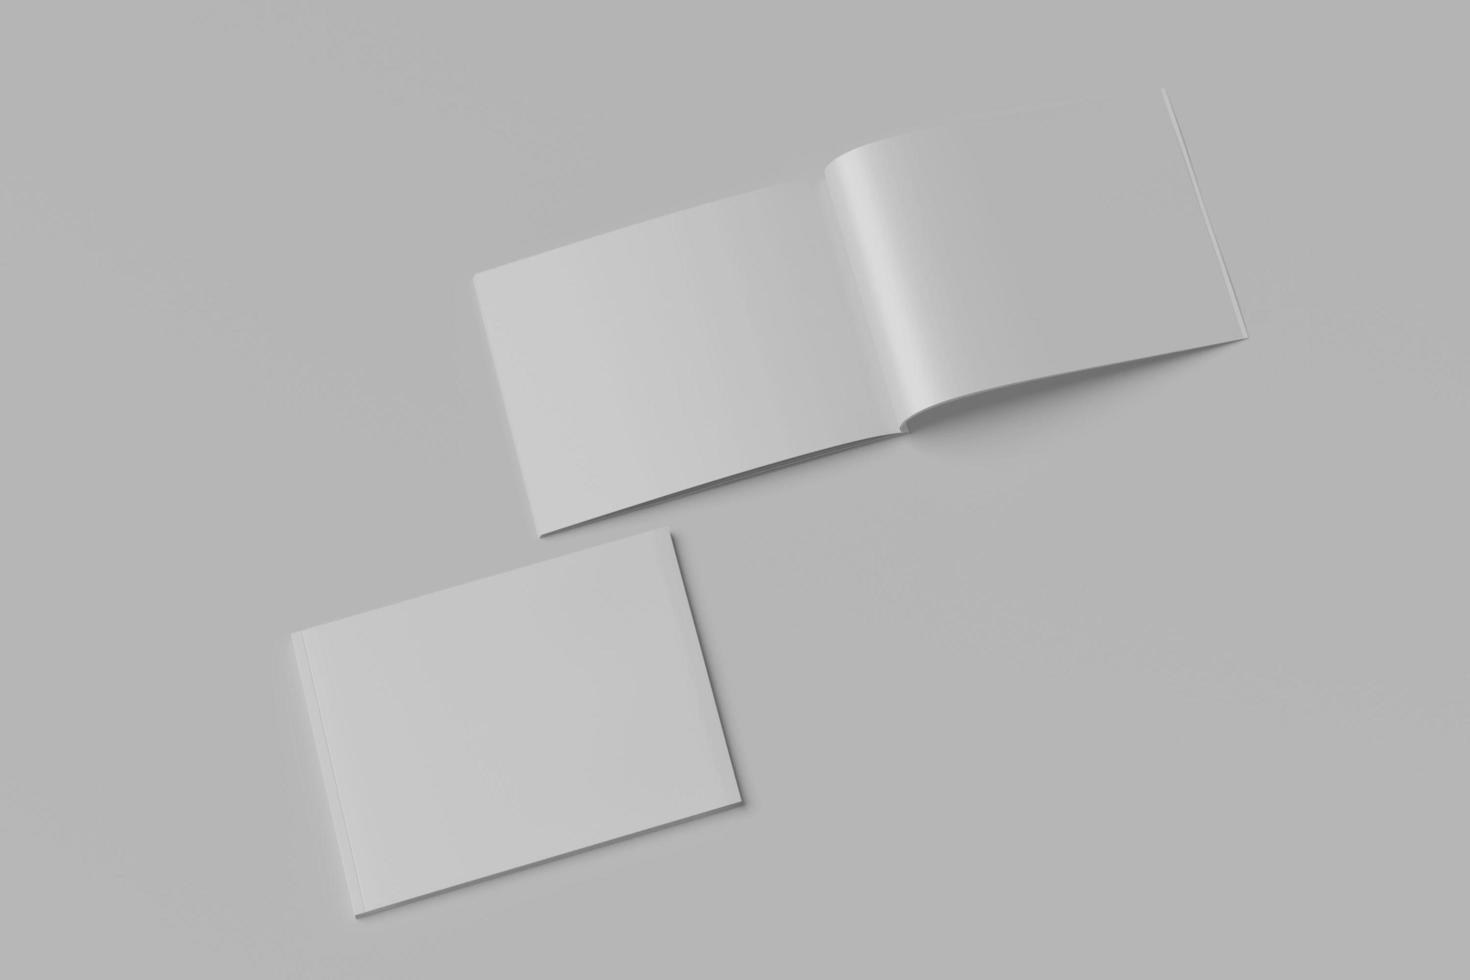 Softcover magazine landscape or brochure mock up isolated on soft gray background. 3d illustration photo